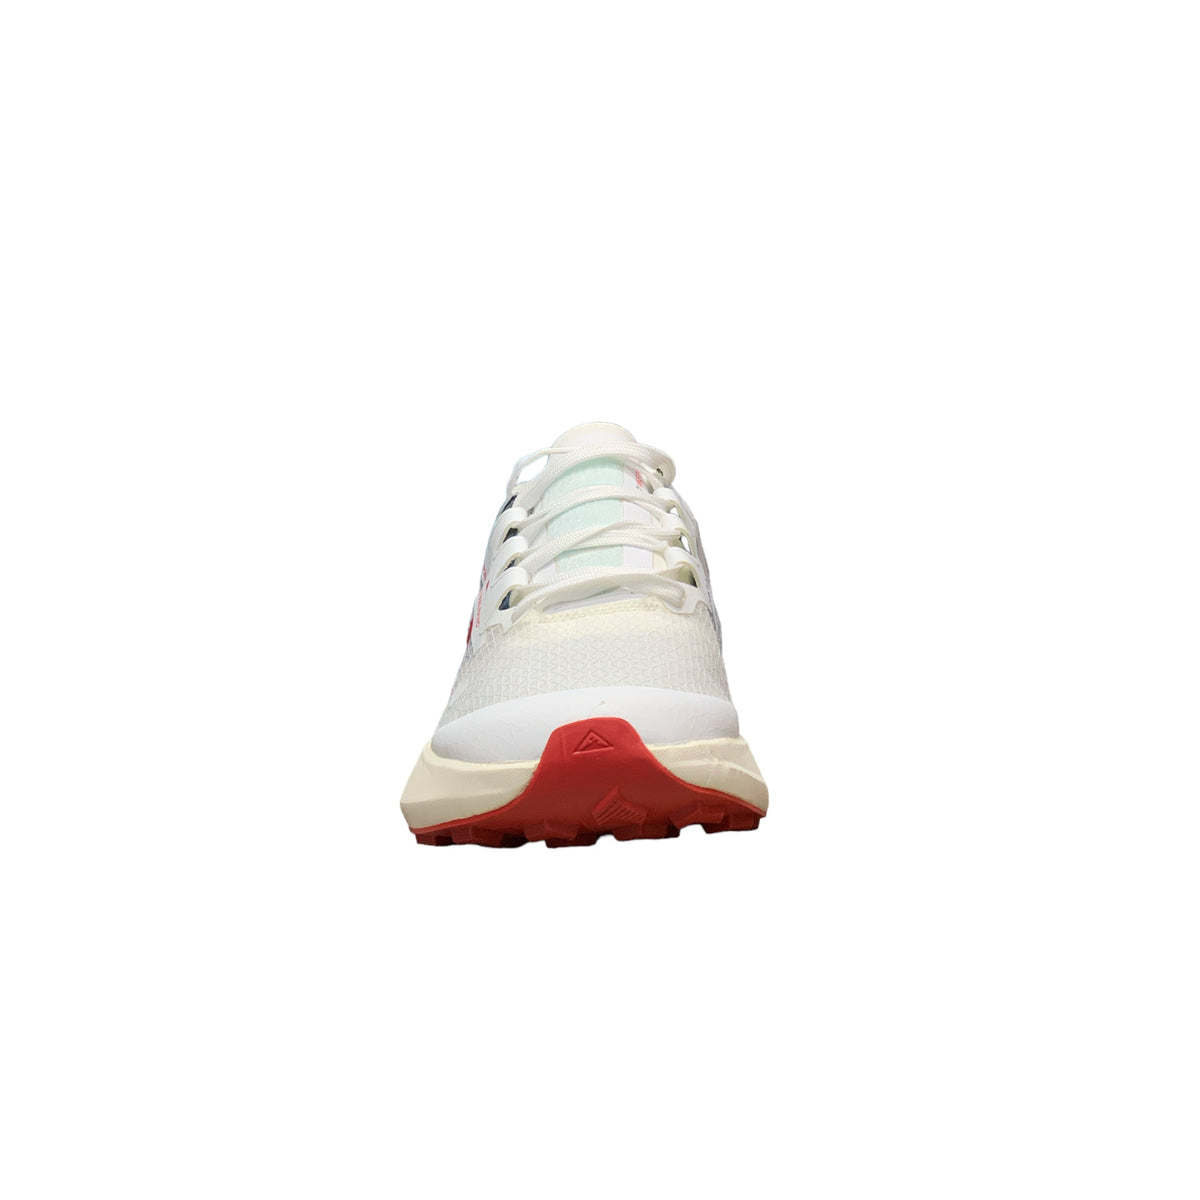 NIKE ZOOMX ULTRAFLY NEXT (WHITE/RED)